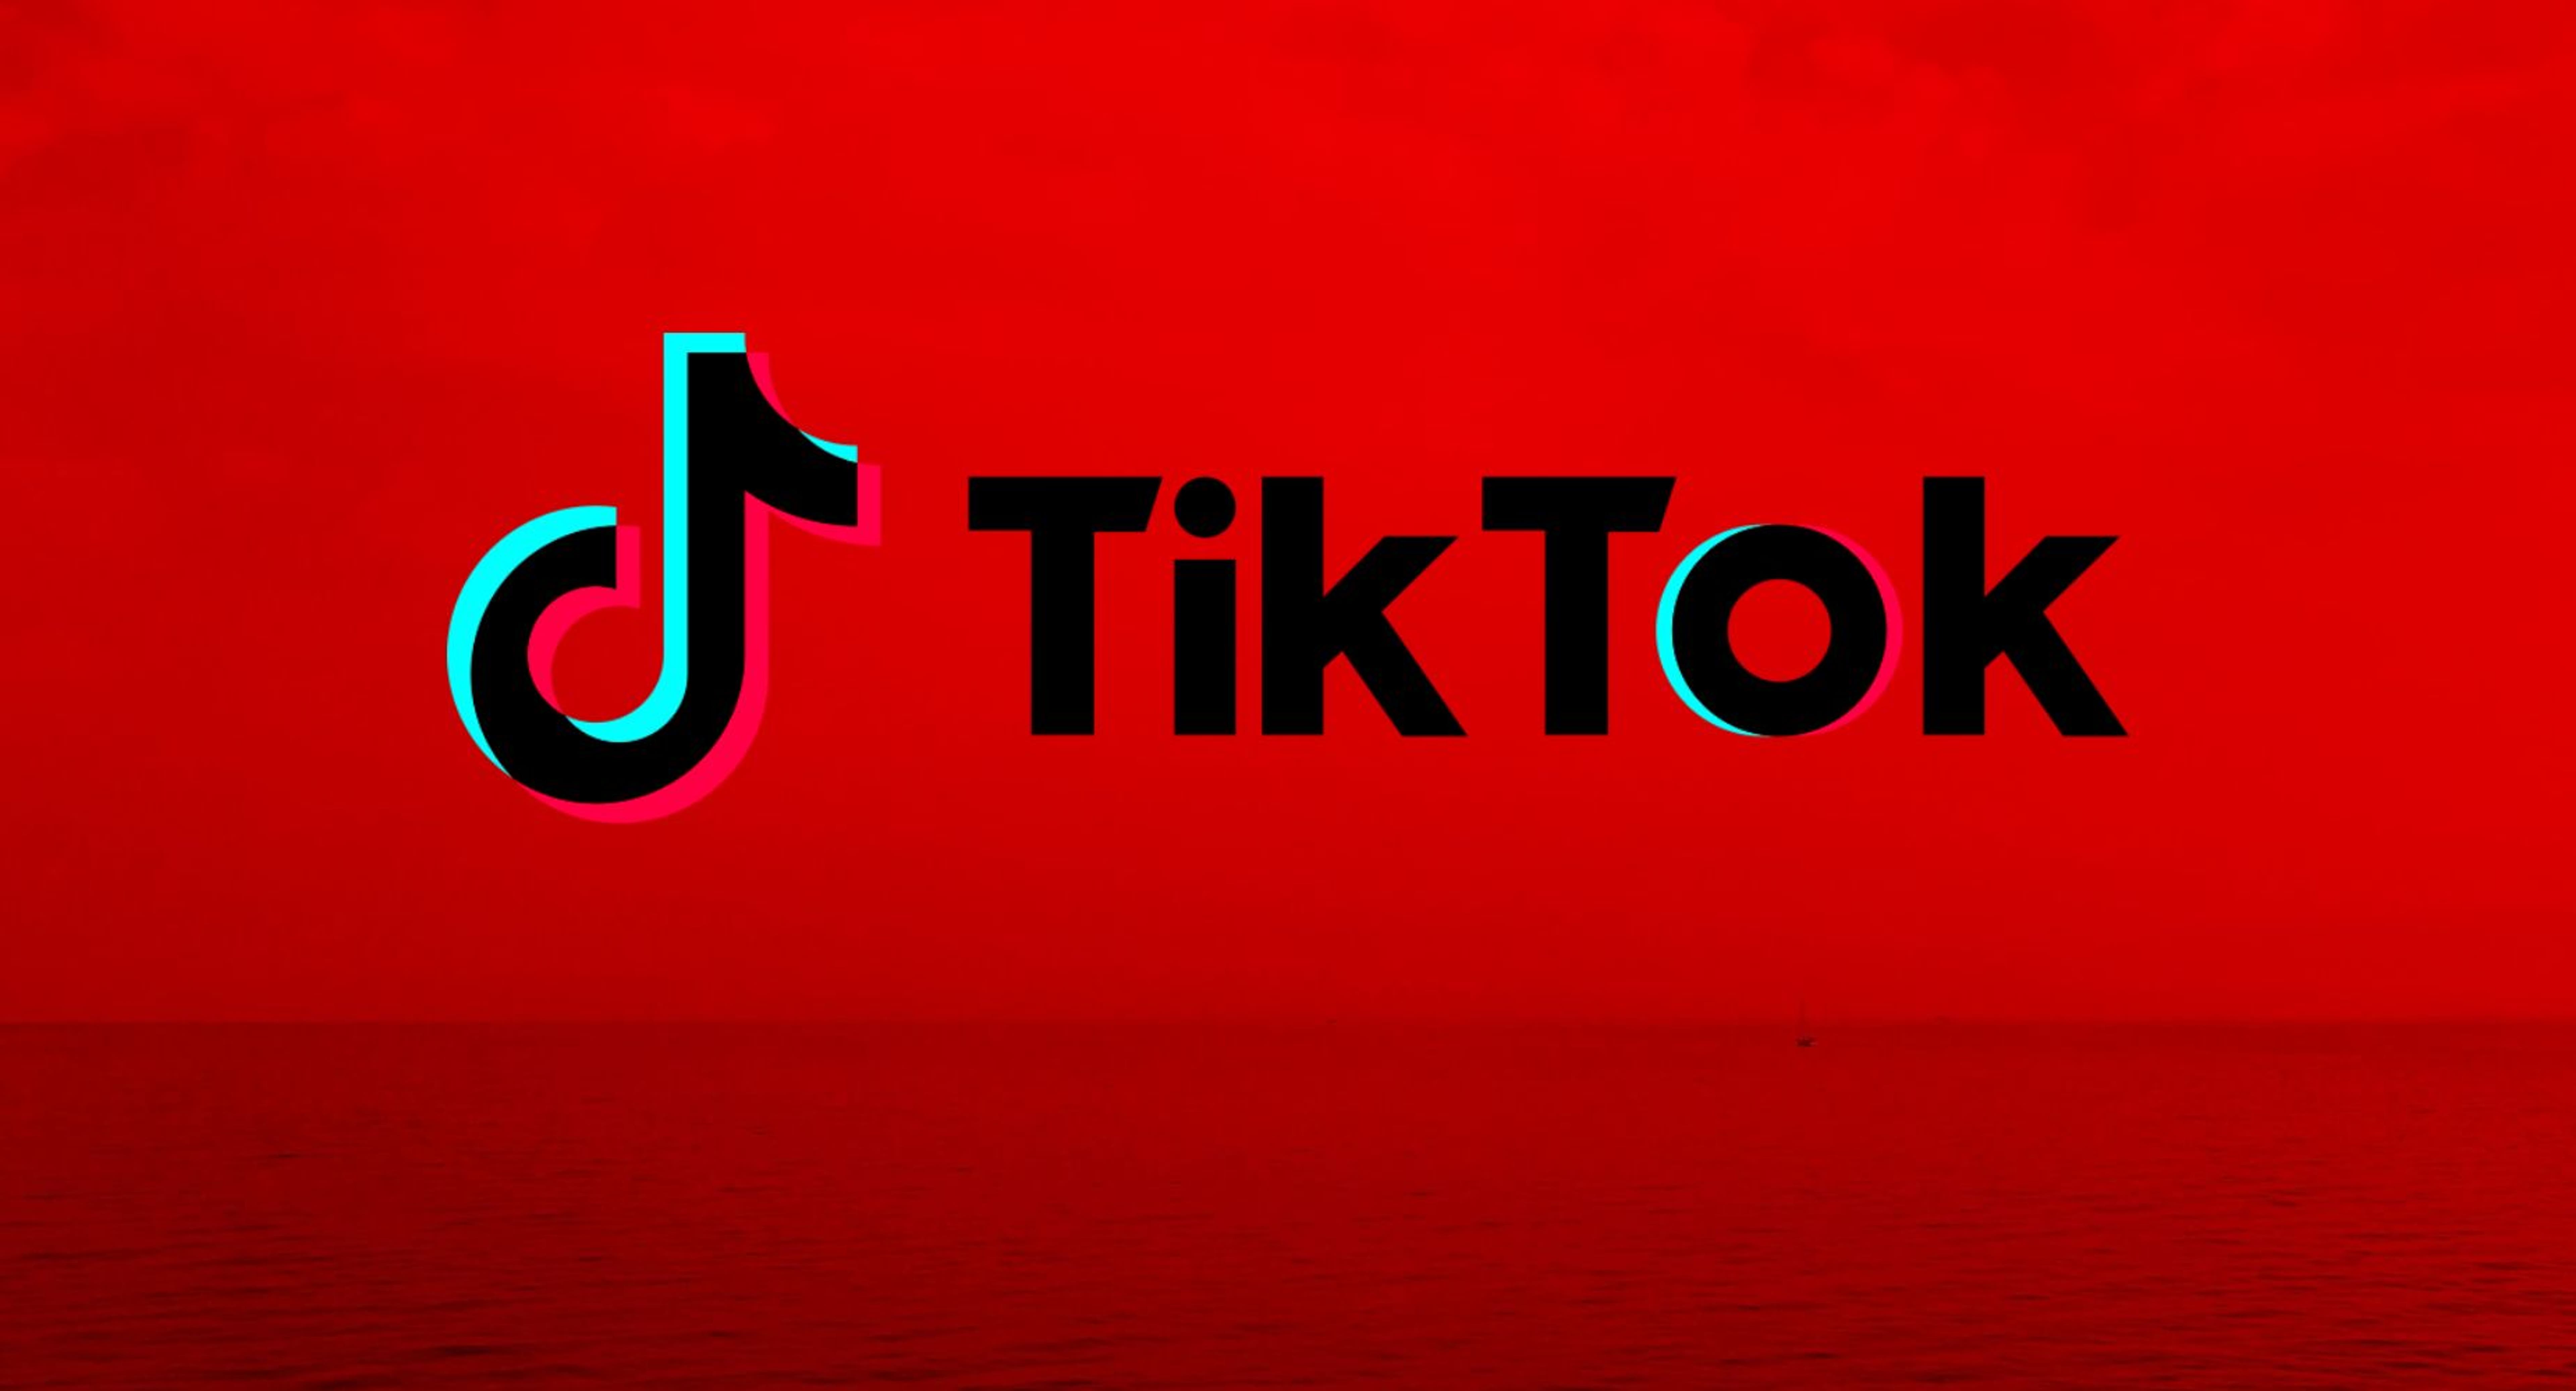 TikTok Takes This Step Amid Increased Scrutiny Over Misuse Of US User Data